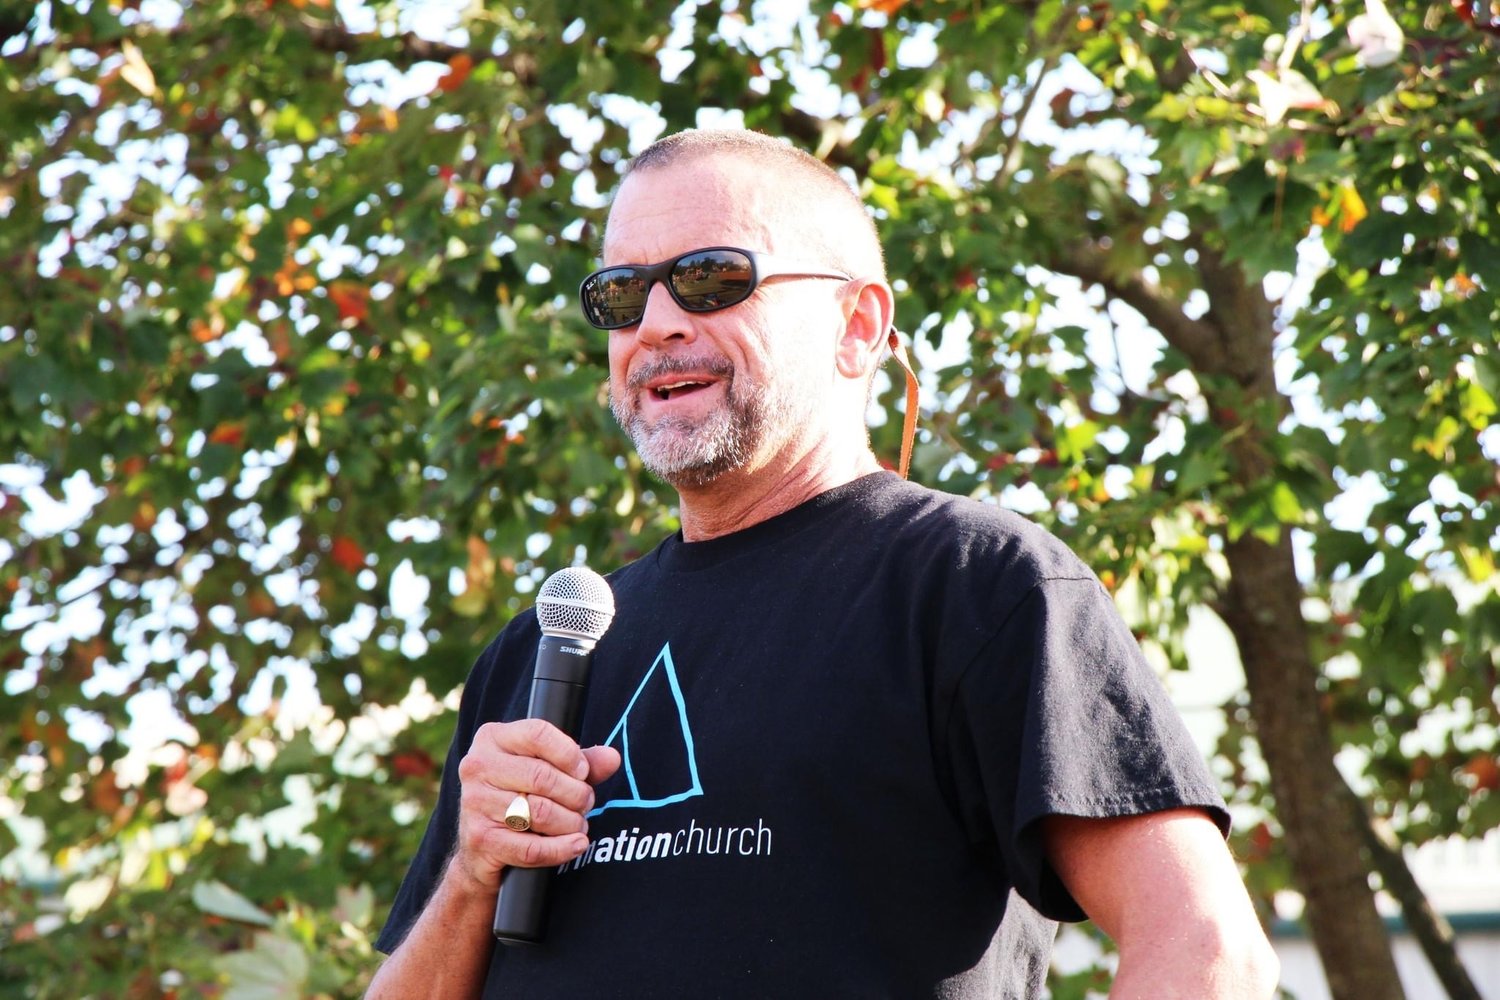 Pastor Mike Dorough addresses the large crowd that came for a block party in October.